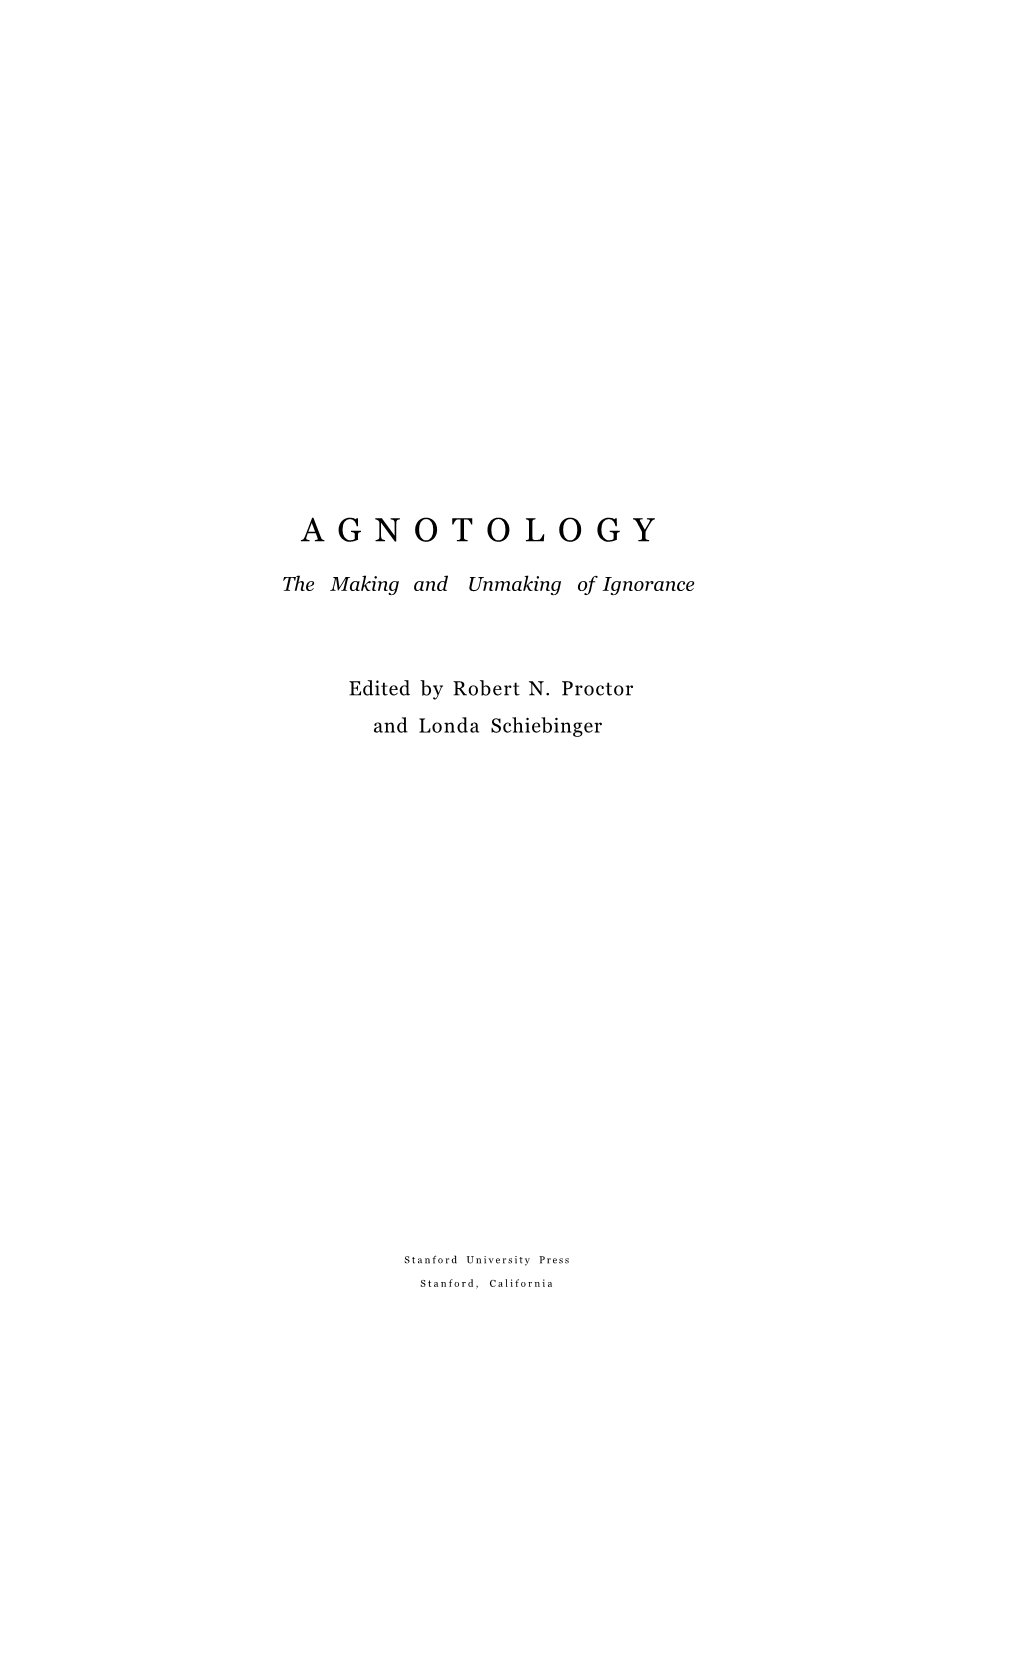 Agnotology : the Making and Unmaking of Ignorance / Edited by Robert N